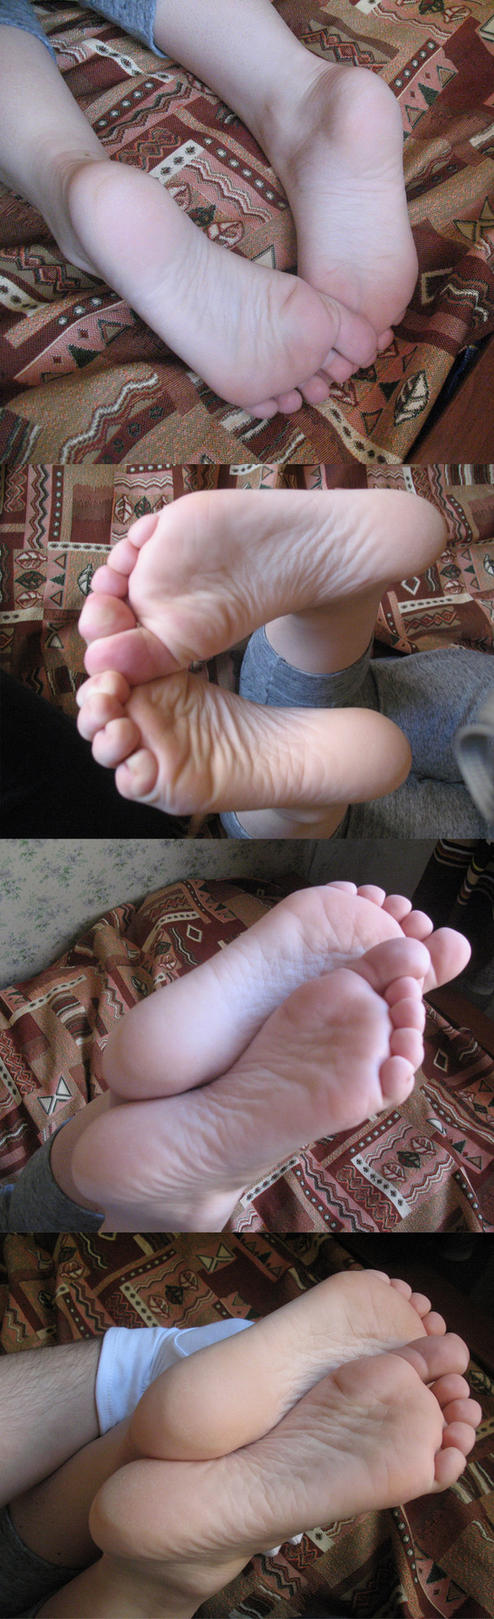 Clips Of Foot Tickling 54